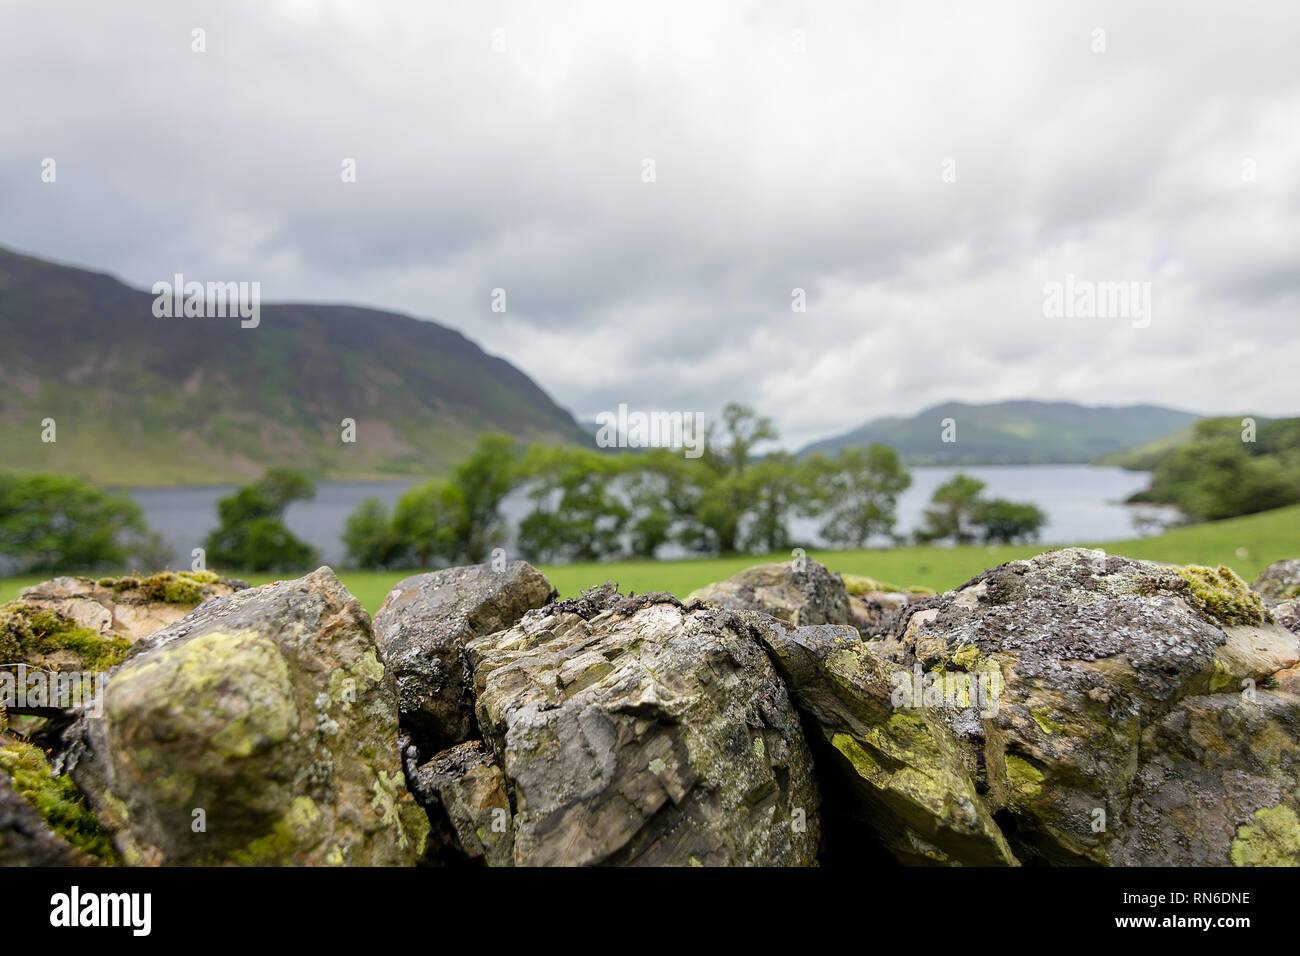 A dry stone wall of Lake District stone with back drop of trees, lake and hills of Cumbria, England. Stock Photo